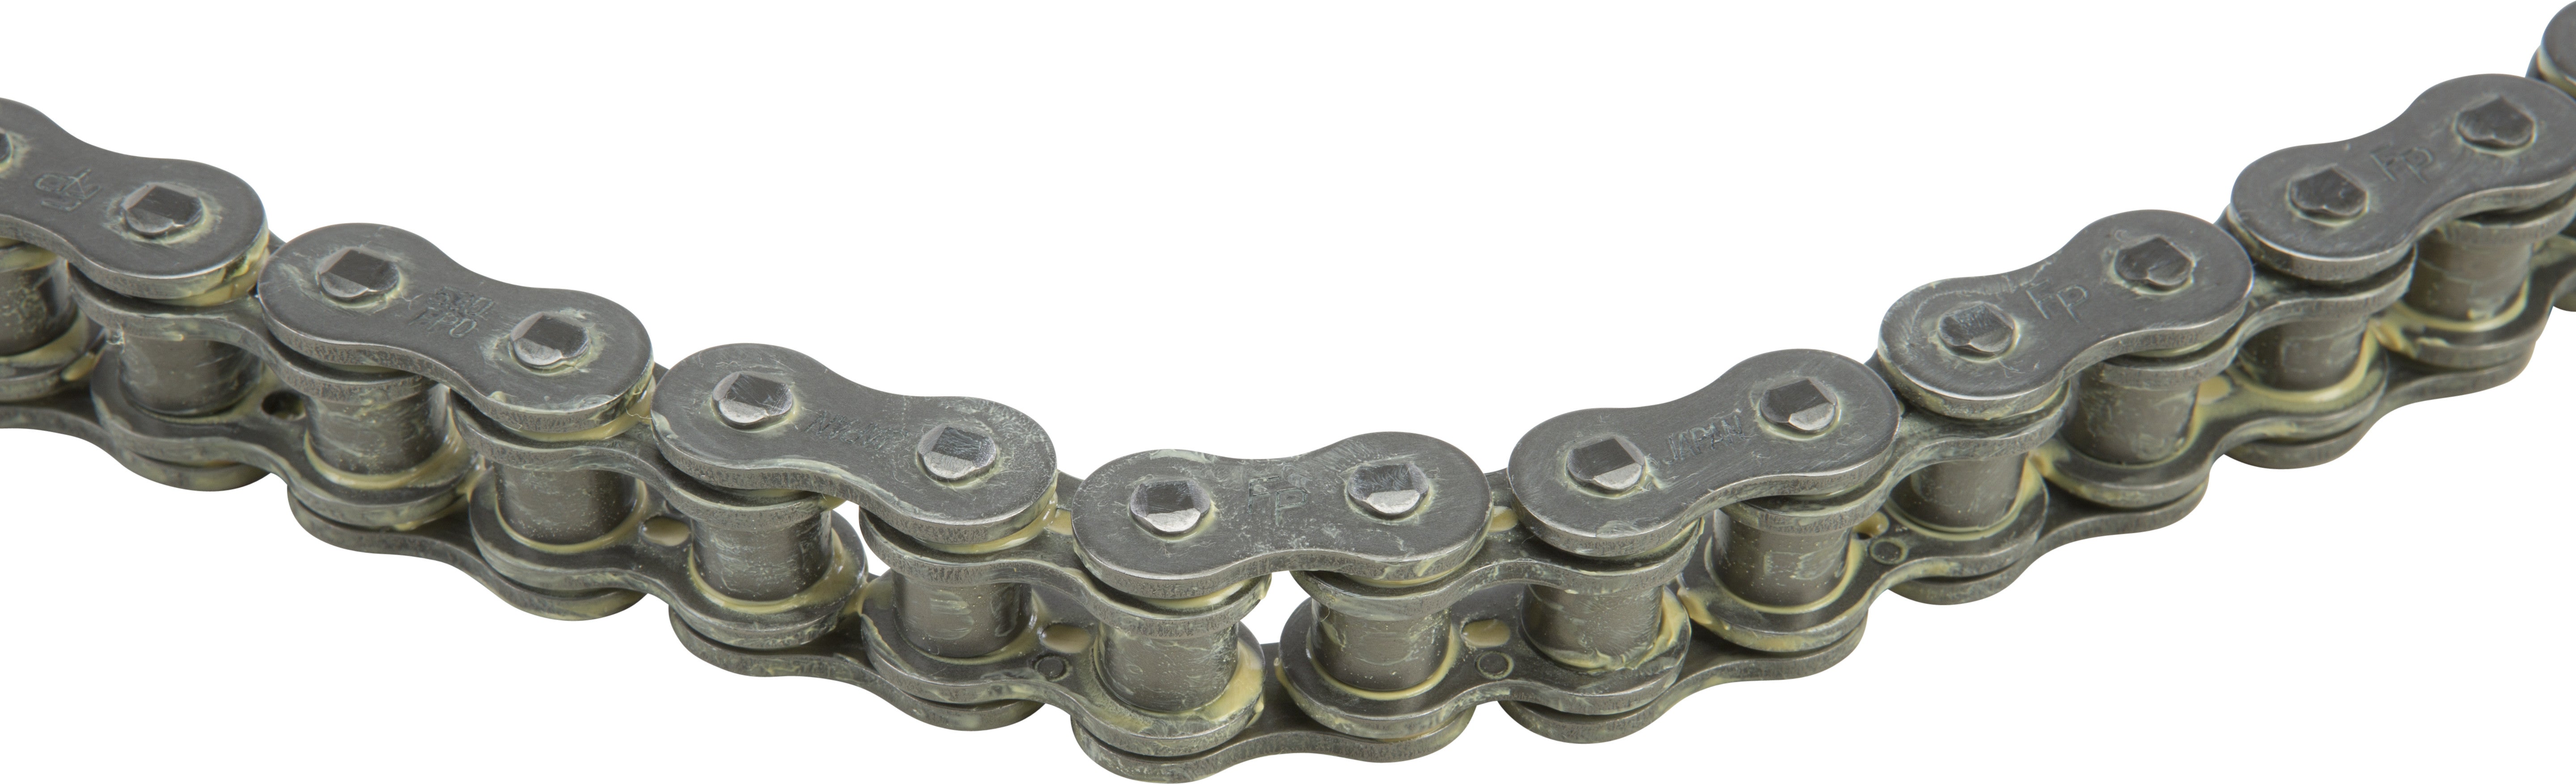 FIRE POWER, FIRE POWER O-RING CHAIN 530X150 530FPO-150